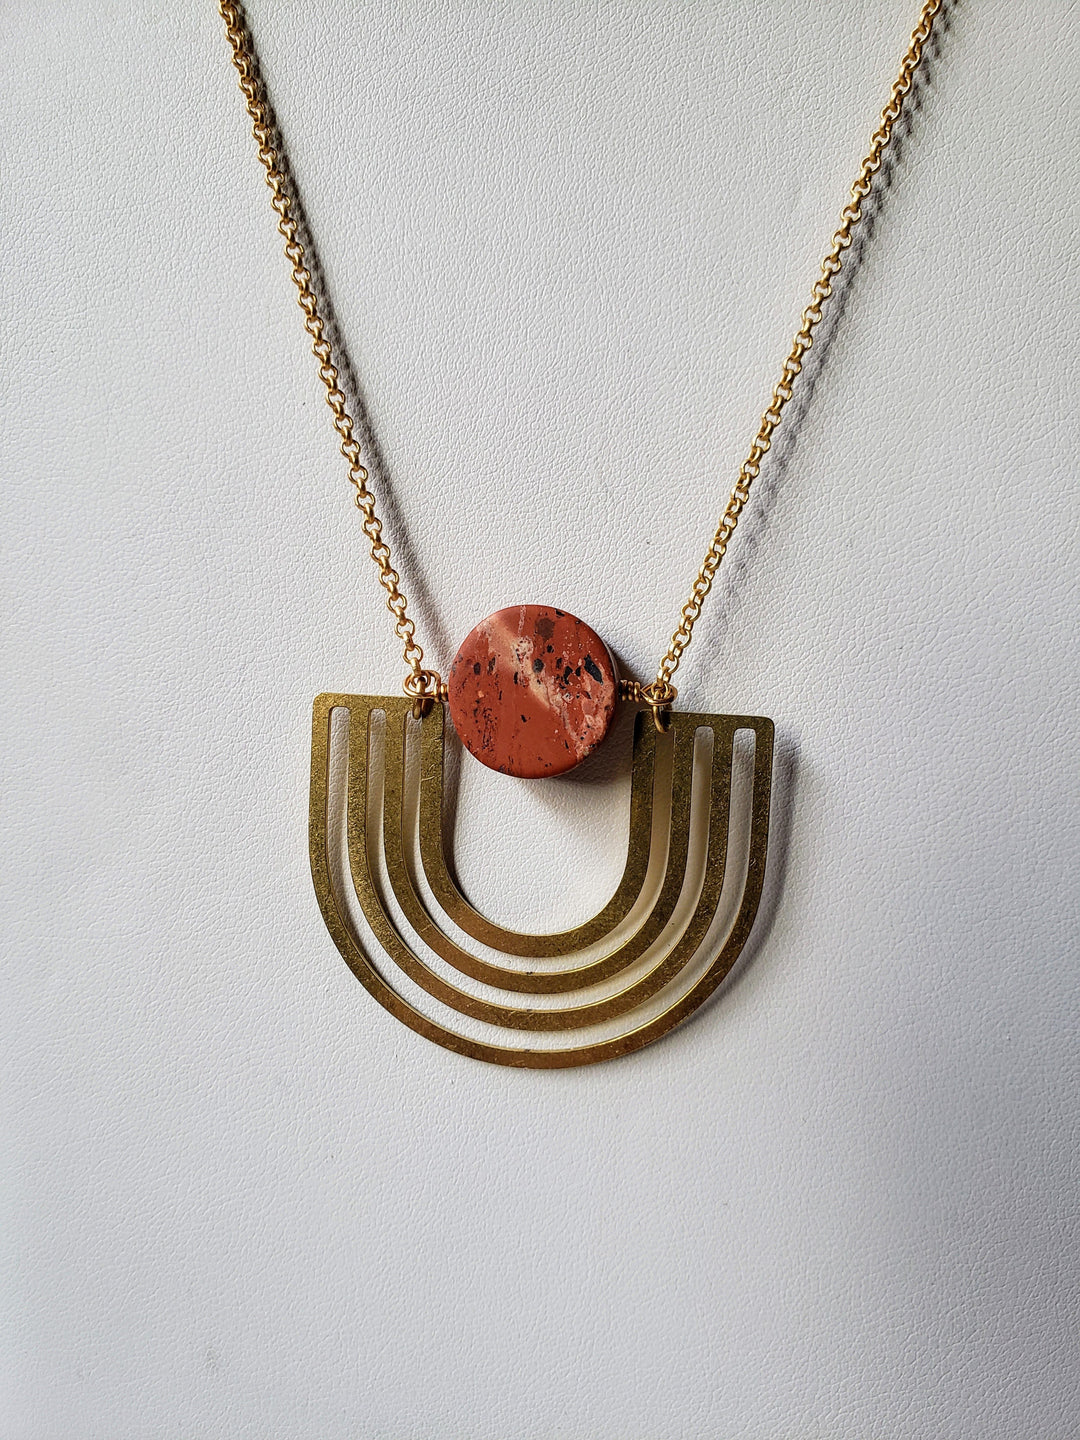 Fire Island Necklace - Red Jasper or Onyx